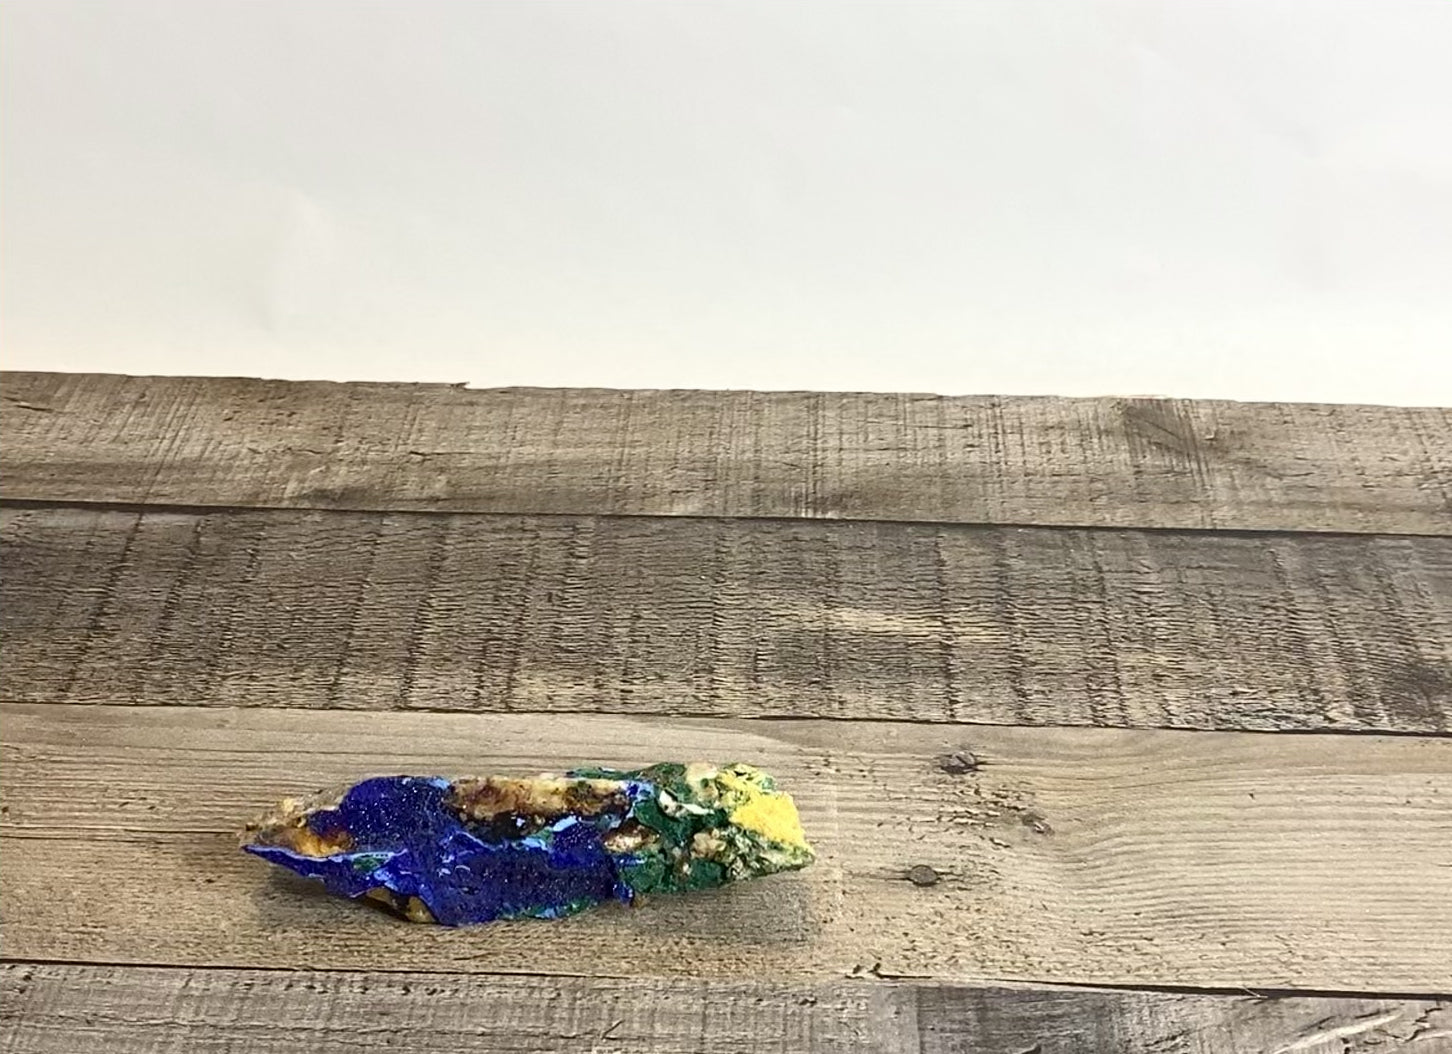 4.3" long Sparkly Azurite with Fibrous Malachite - Video